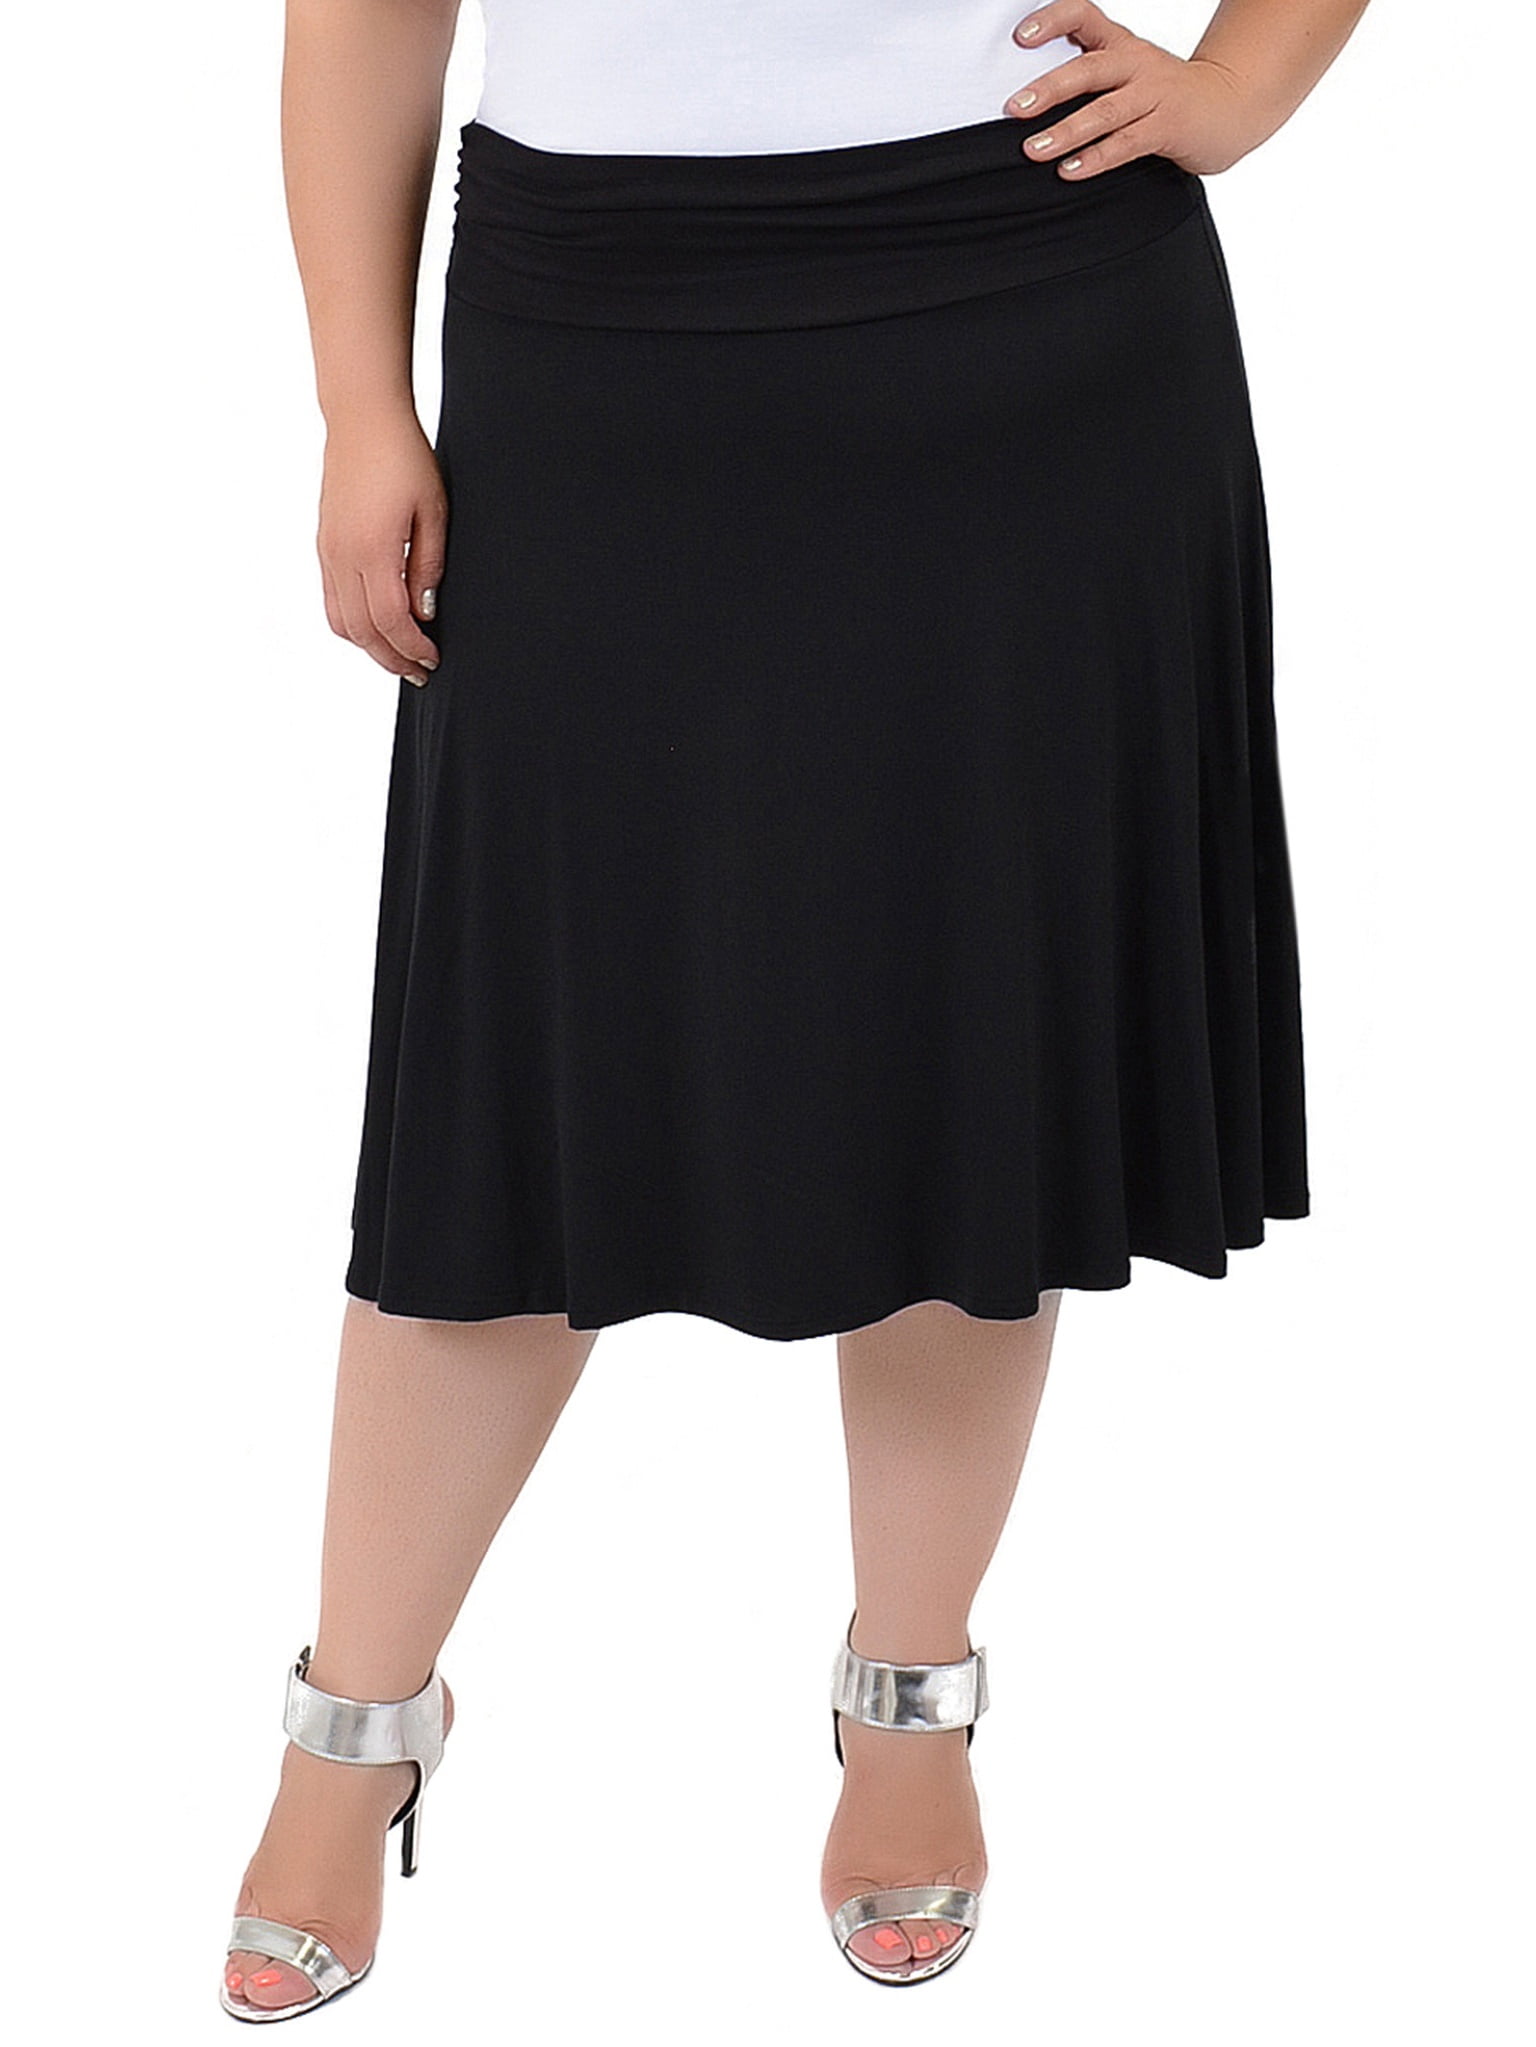 Stretch Is Comfort - Plus Size Knee Length Flowy Skirt - X-Large (12-14 ...